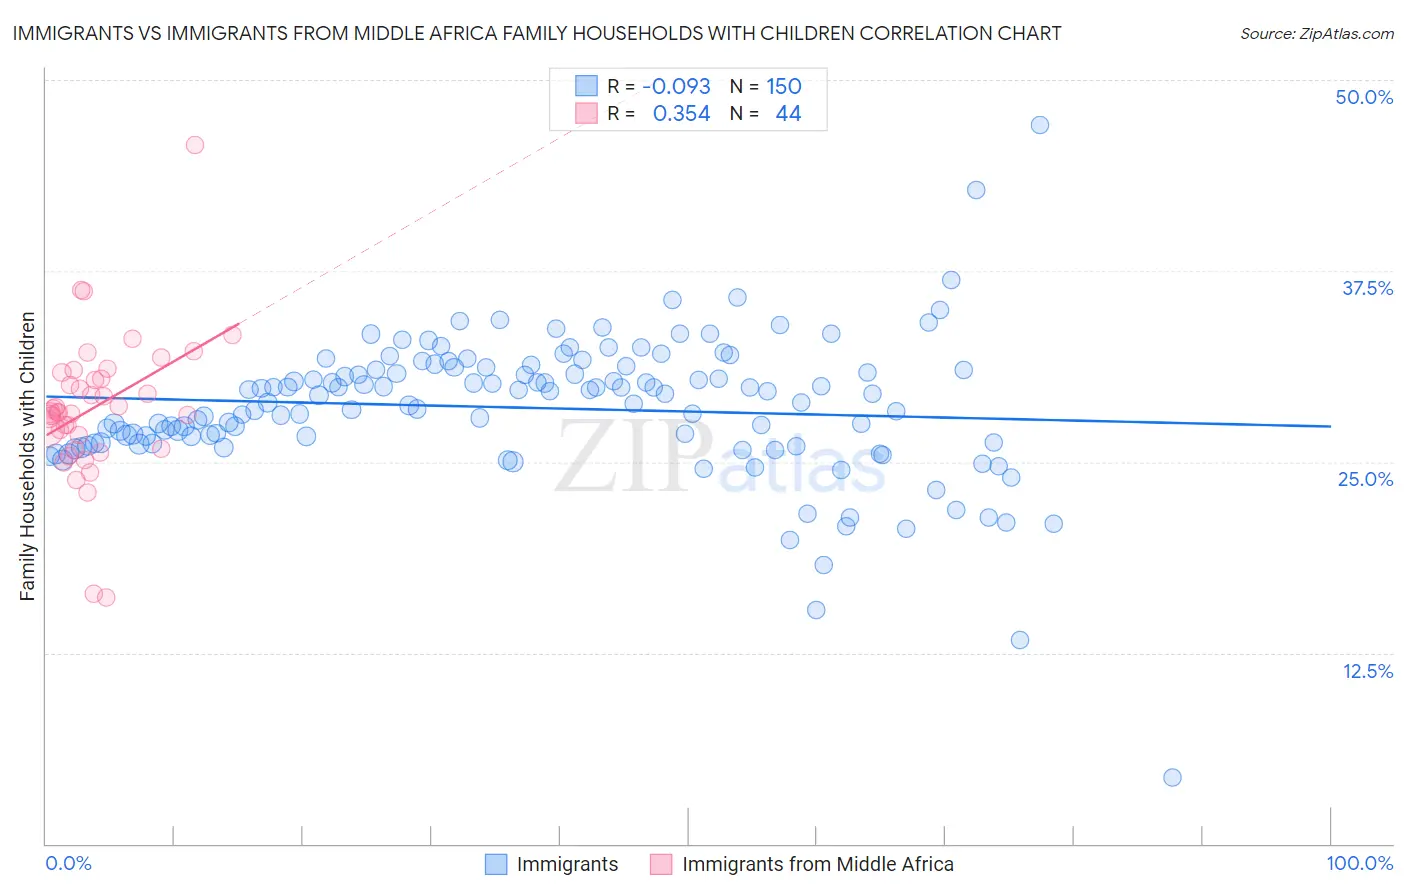 Immigrants vs Immigrants from Middle Africa Family Households with Children